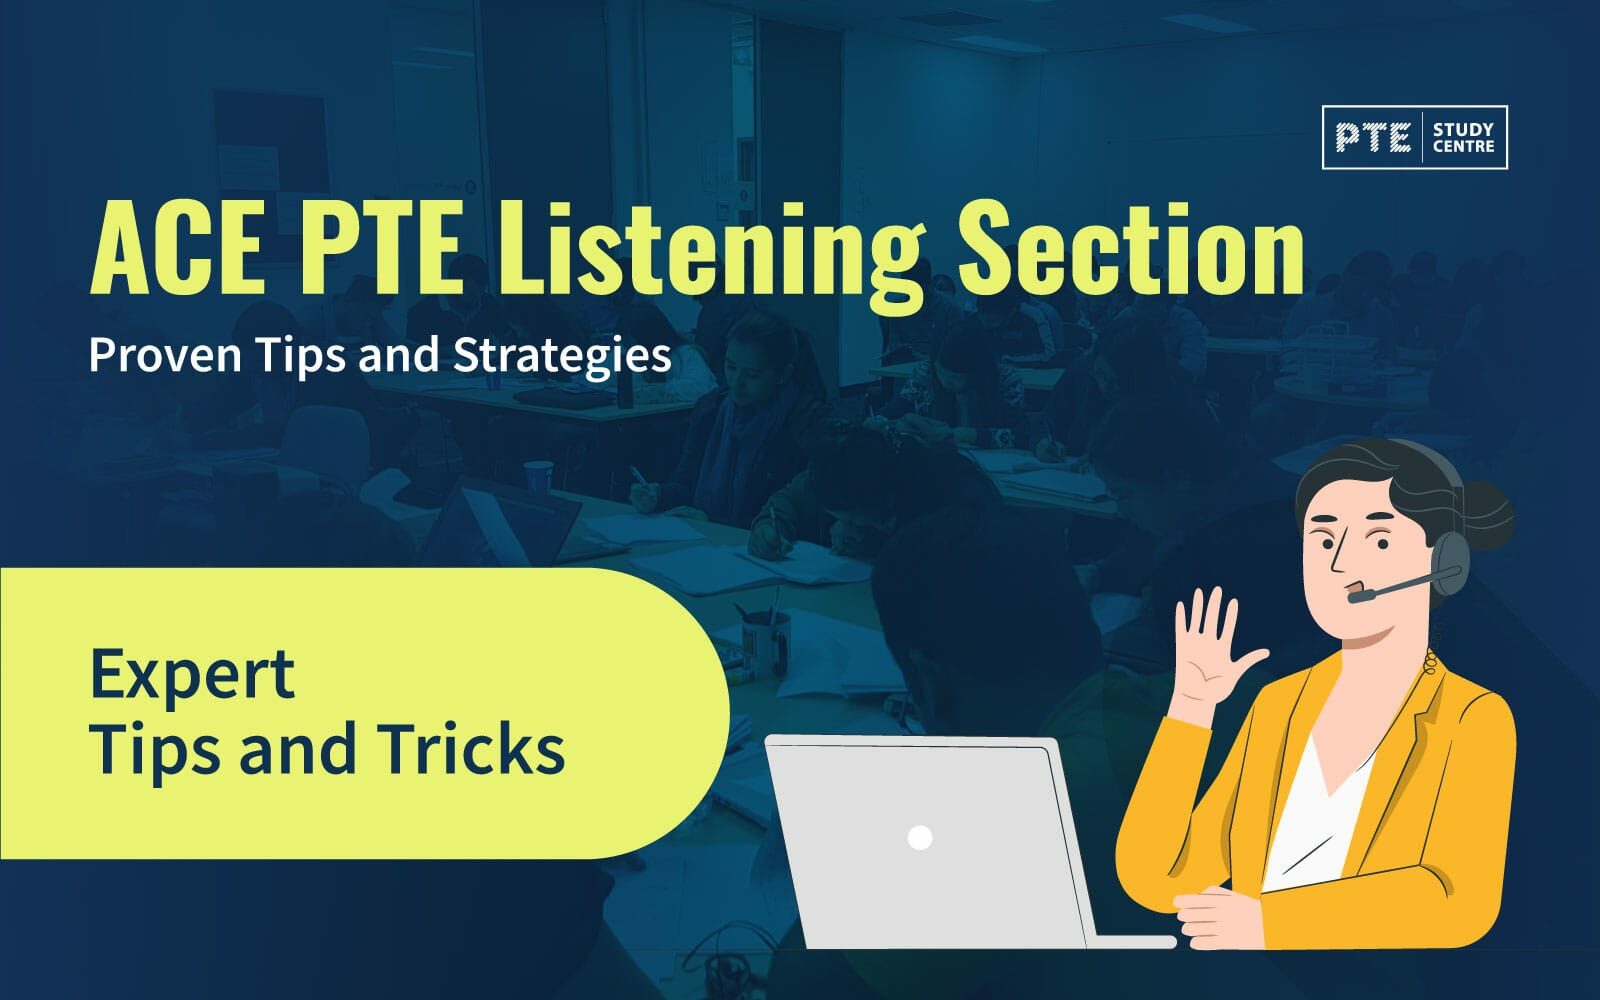 Ace PTE Listening Section: Proven Tips and Strategies